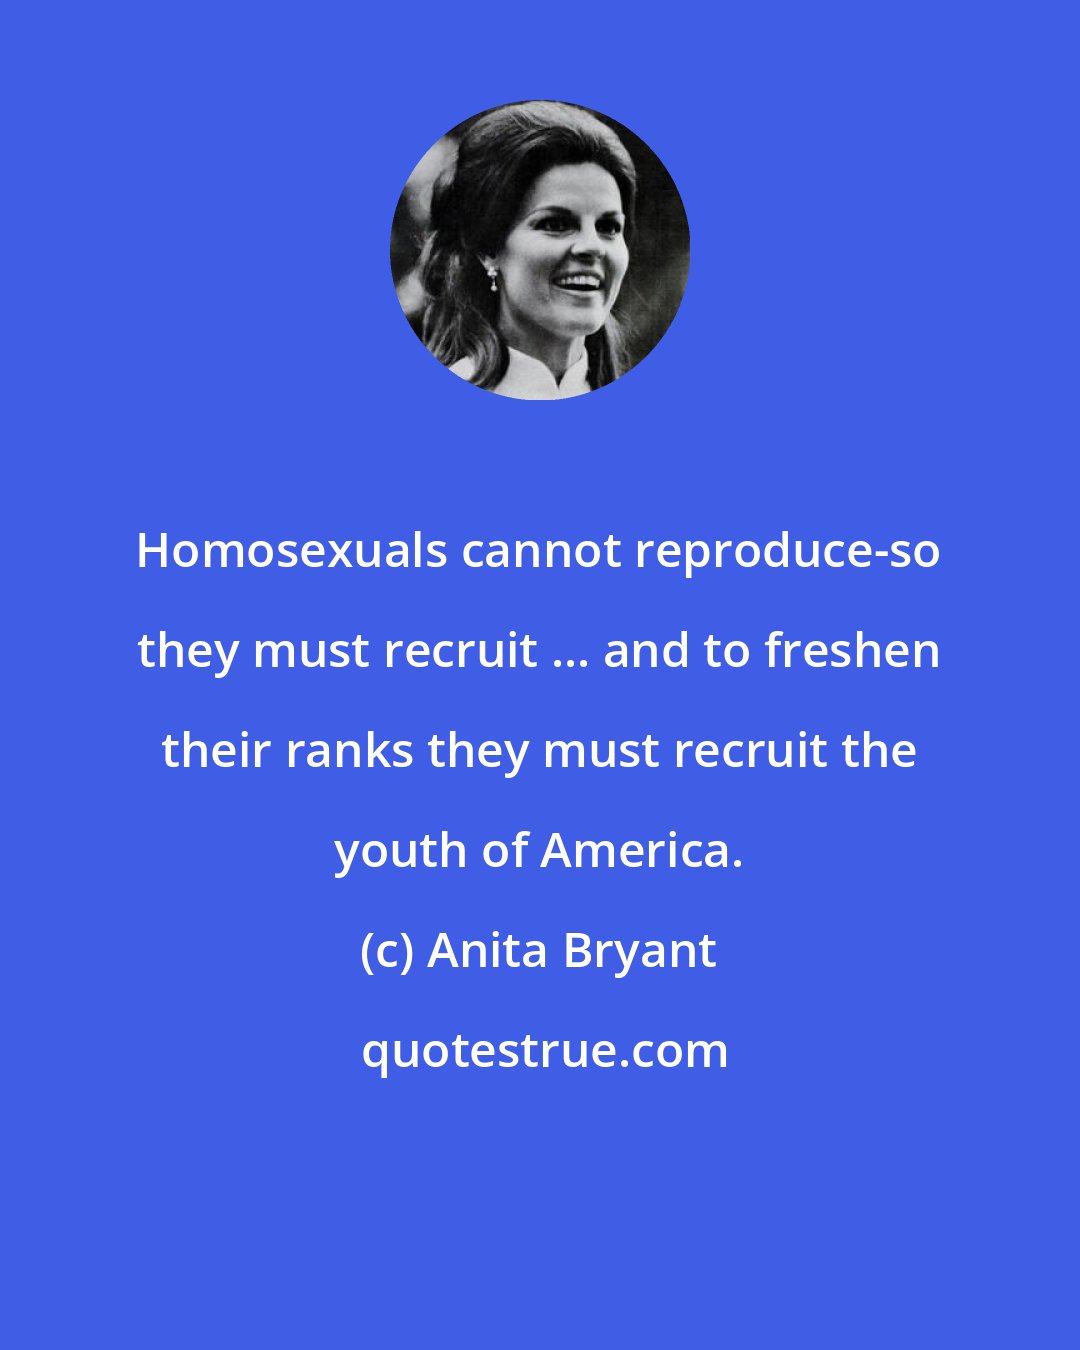 Anita Bryant: Homosexuals cannot reproduce-so they must recruit ... and to freshen their ranks they must recruit the youth of America.